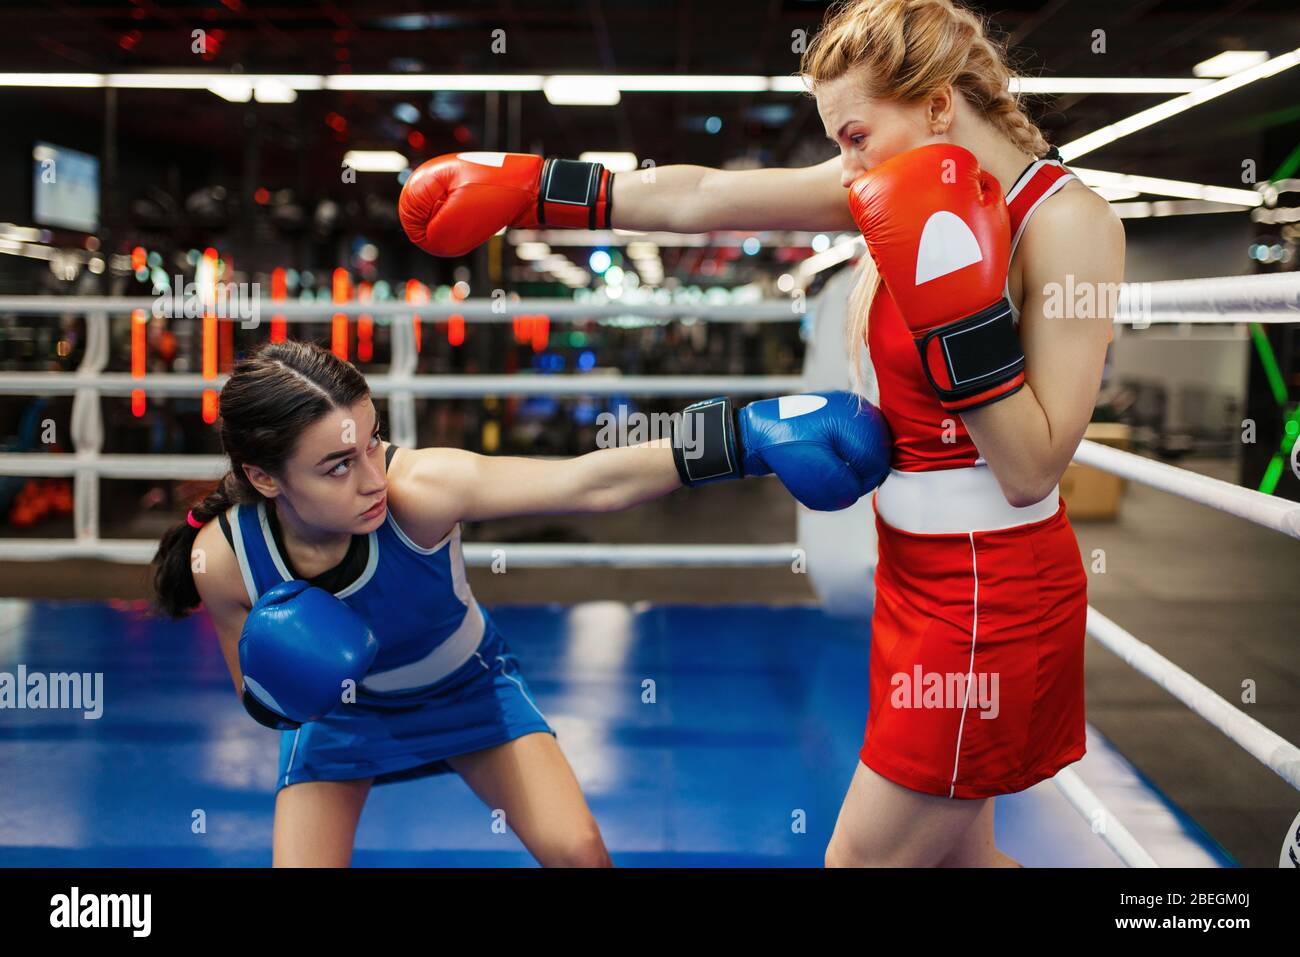 Women in red and blue gloves boxing on the ring Stock Photo